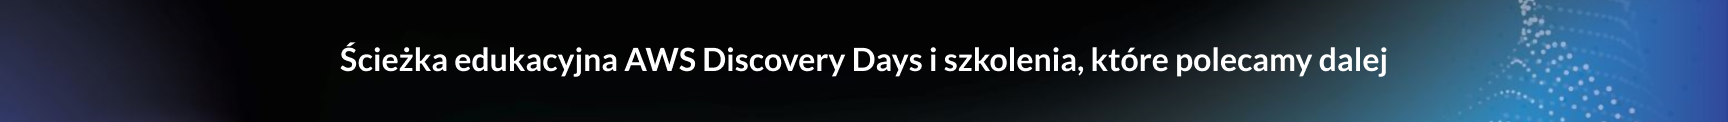 AWS Discovery Days